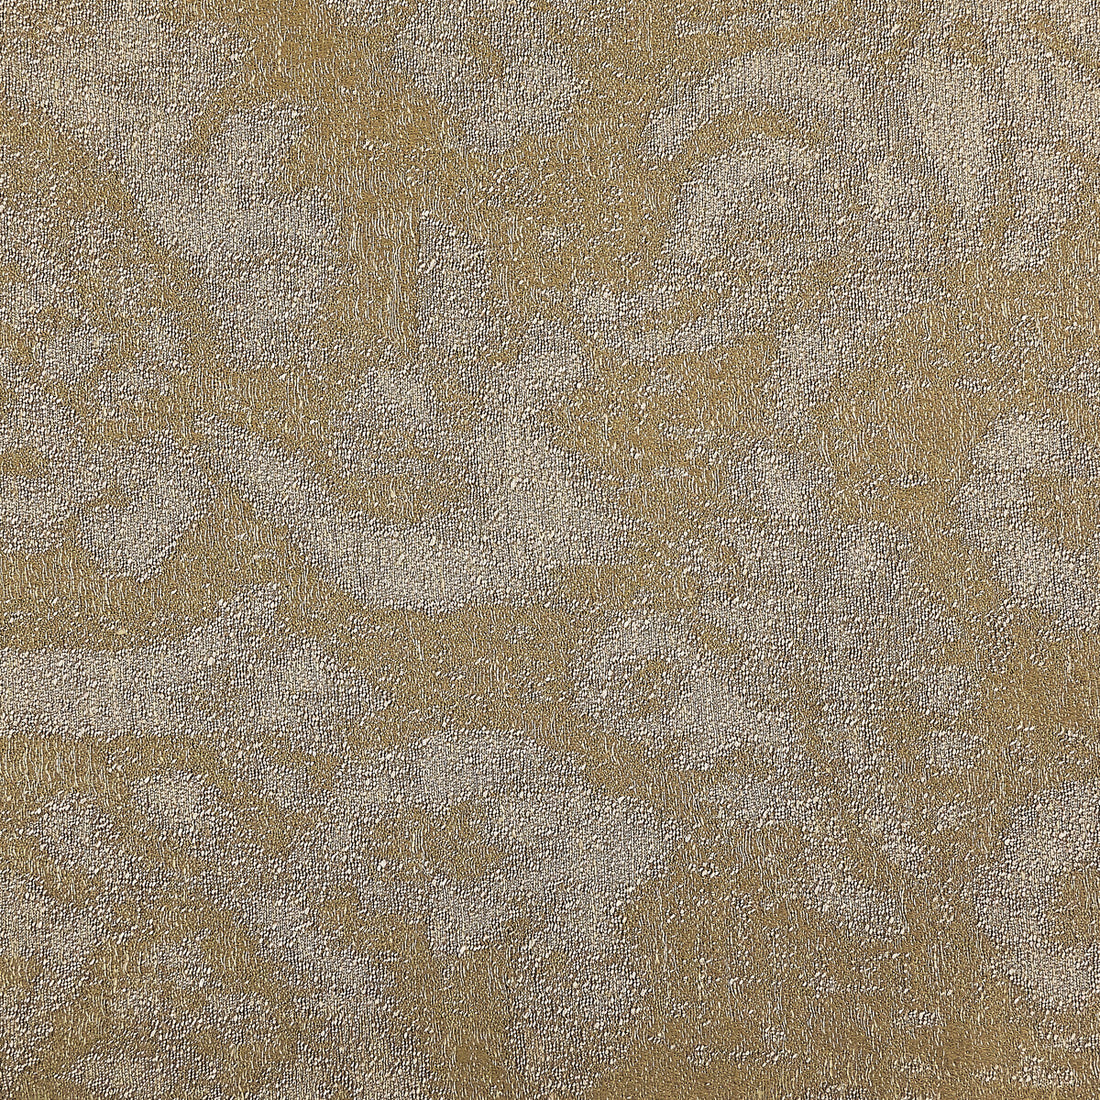 Idyllic fabric in 1 color - pattern LZ-30211.01.0 - by Kravet Design in the Lizzo collection